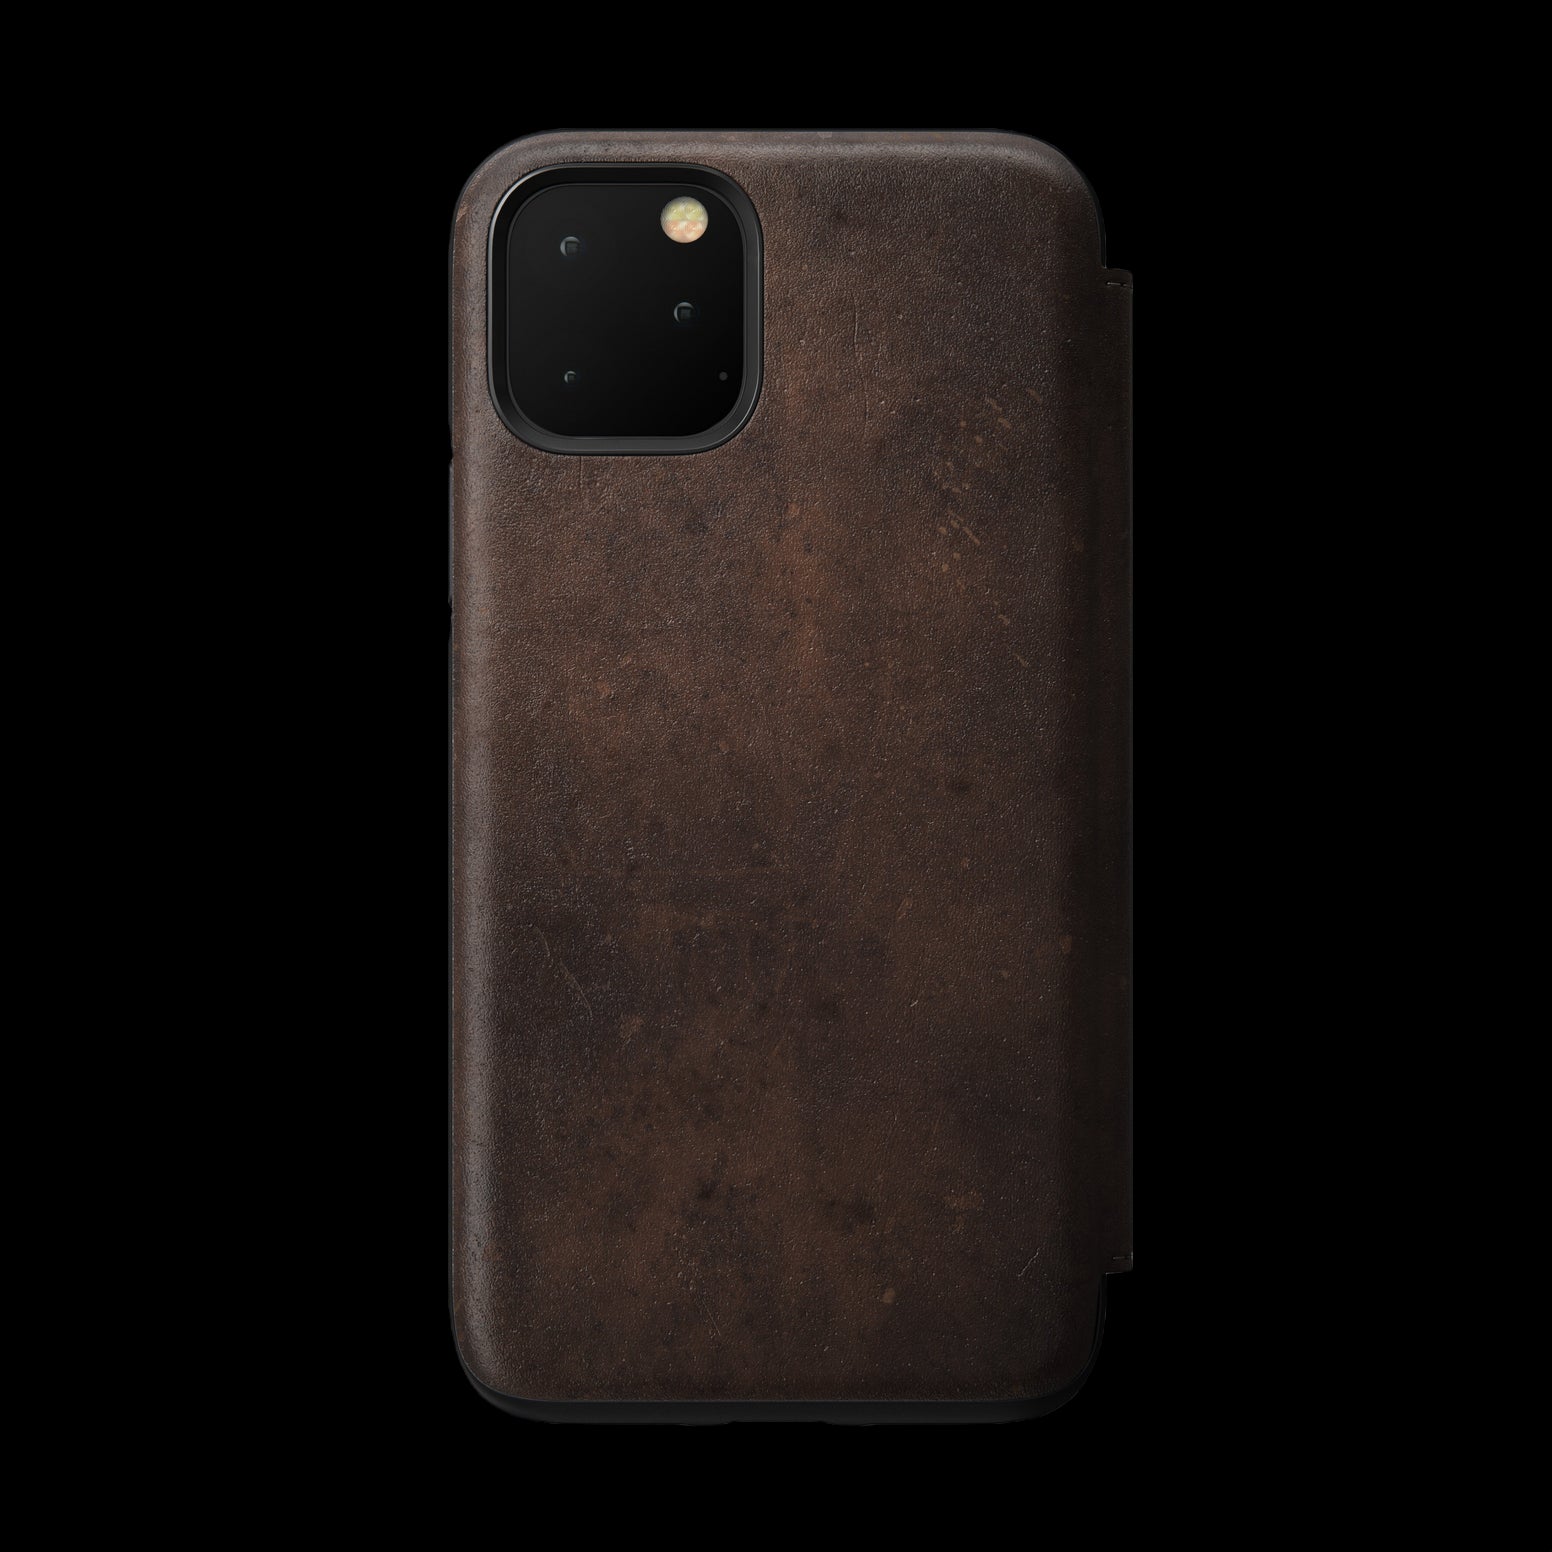 Nomad Rugged Folio Leather Case for iPhone 11 Pro - Rustic Brown - Discontinued